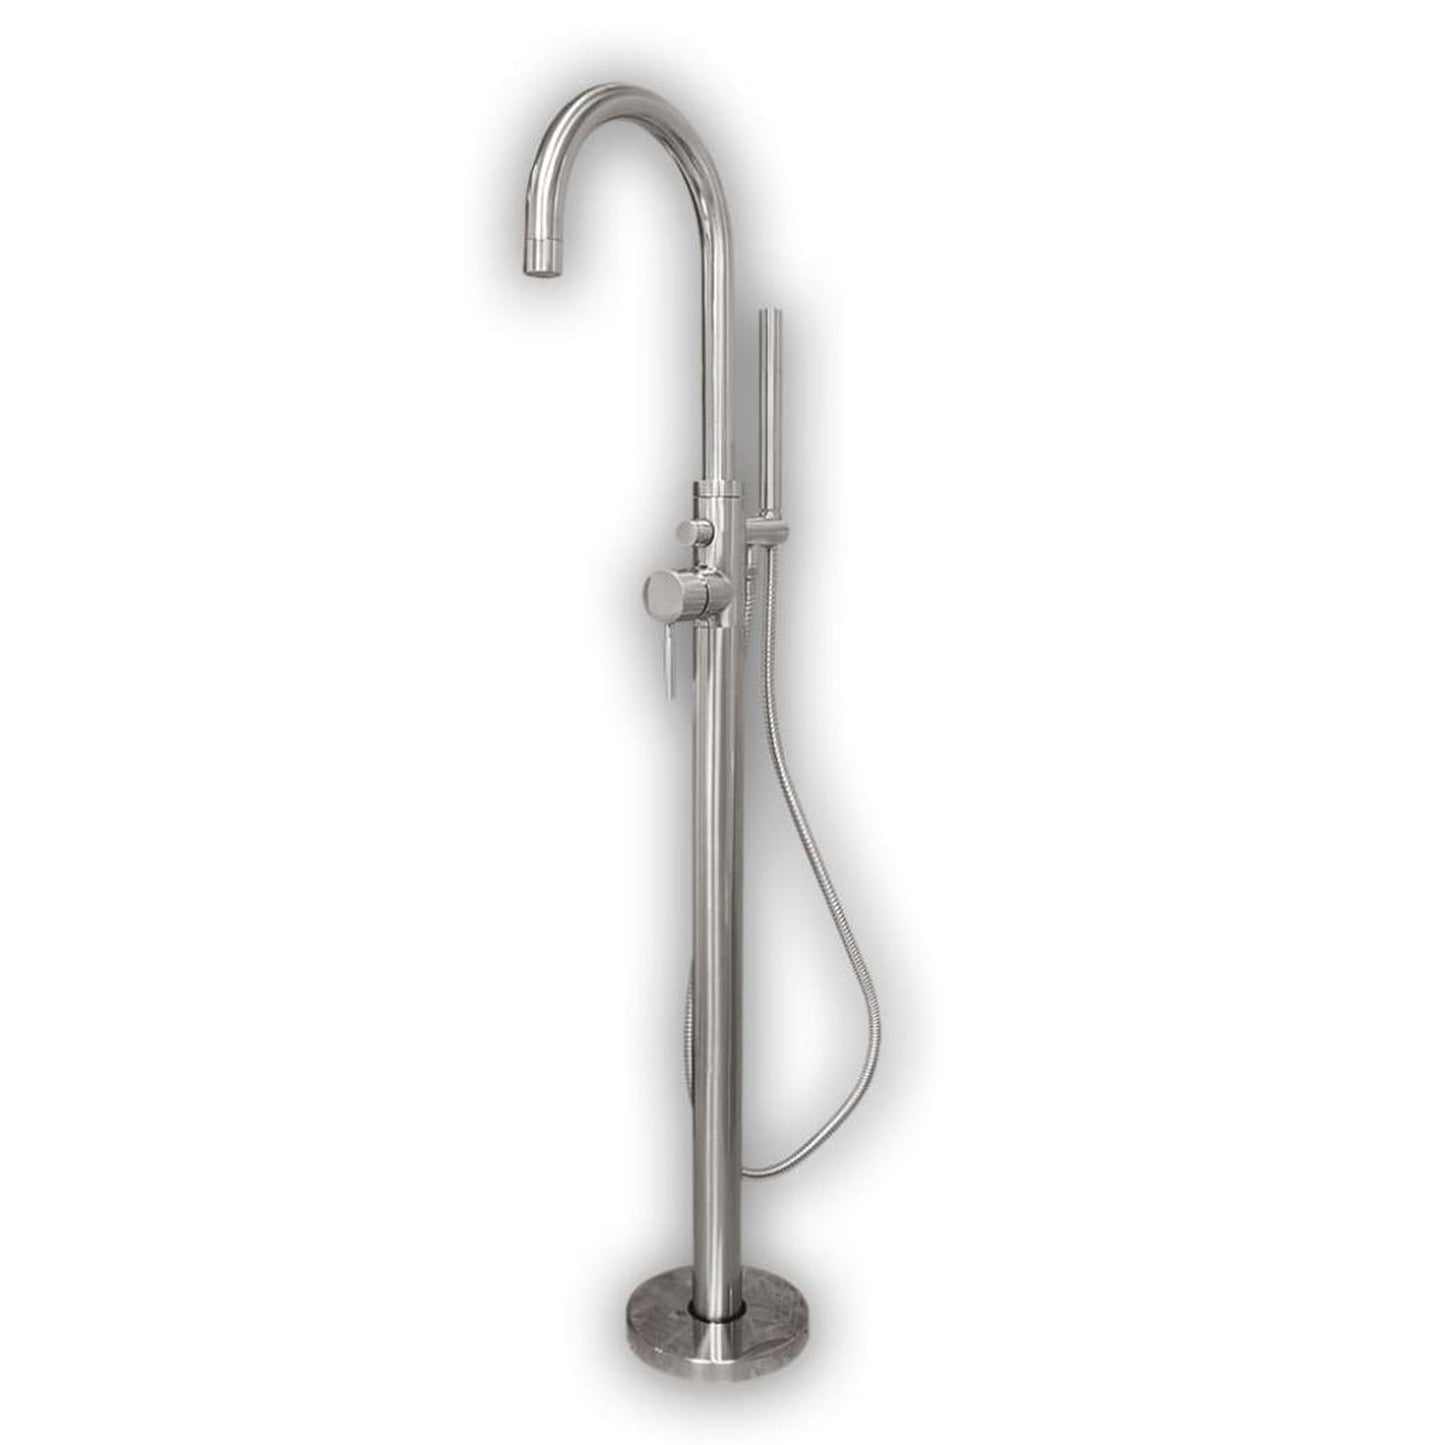 Cambridge Plumbing Brushed Nickel Modern Floor Mounted Tub Filler Faucet With Shower Wand